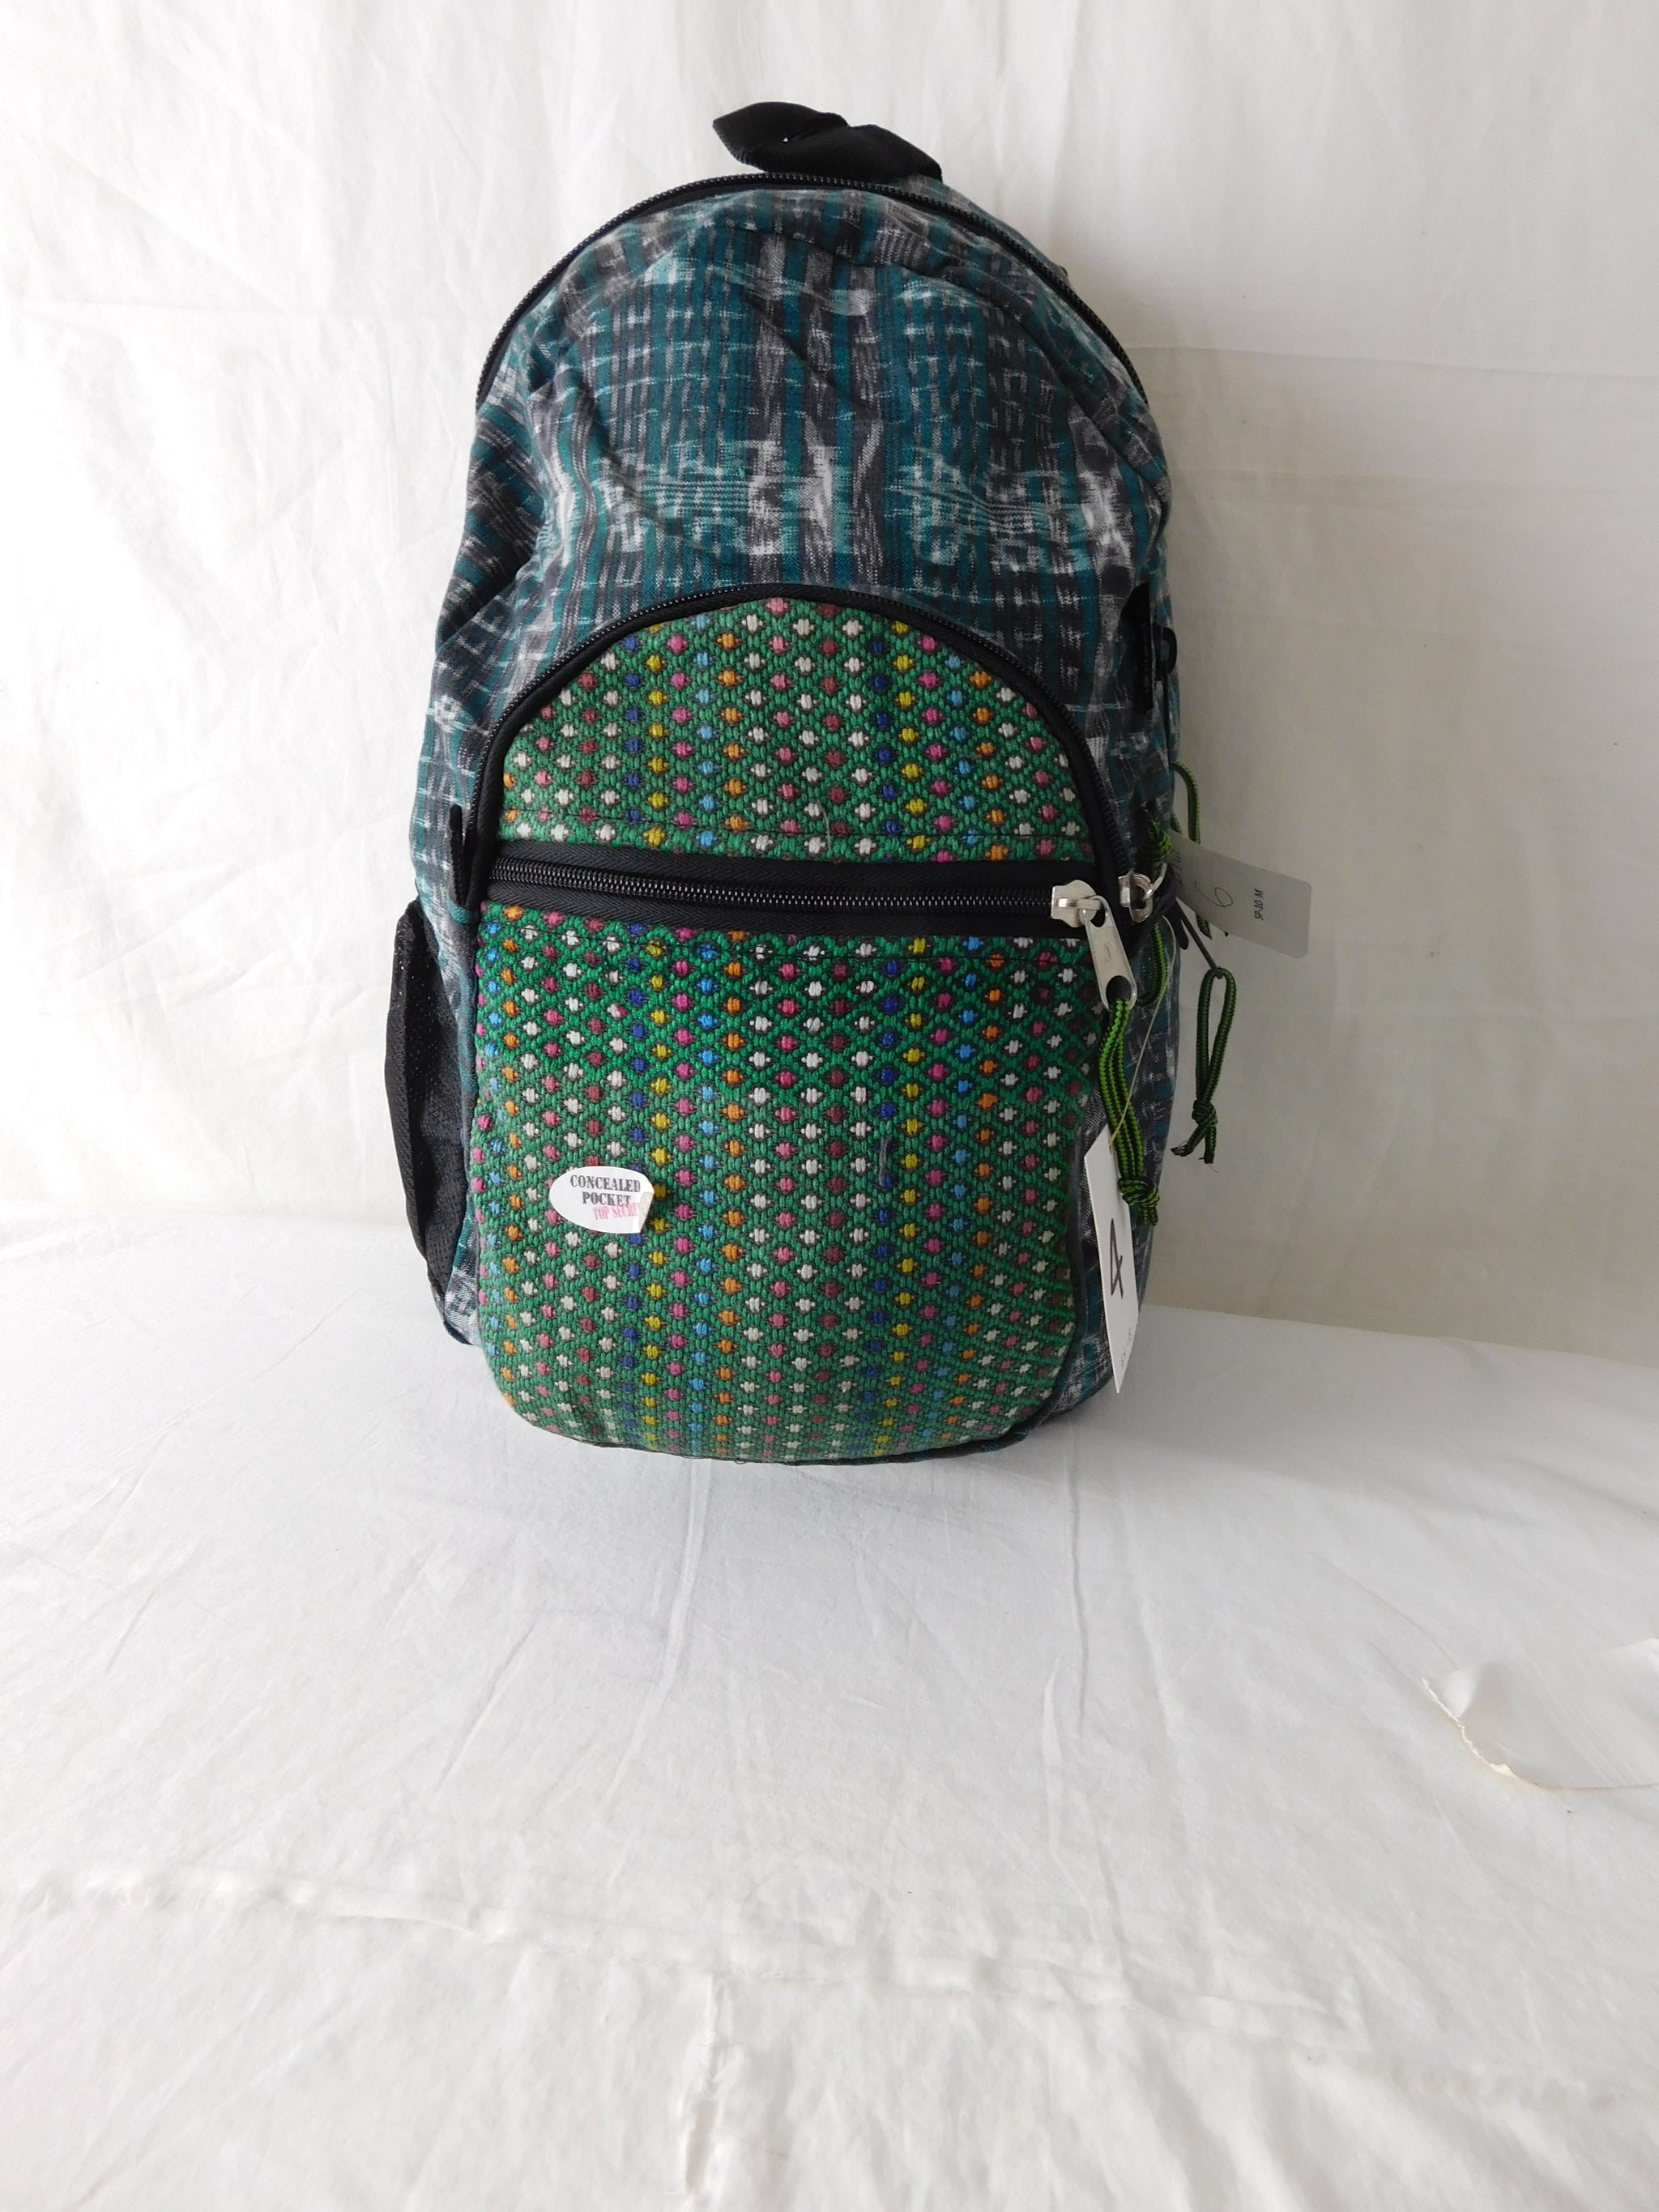 Hand-Woven Backpack with Hand-Brocaded Accents (Medium)